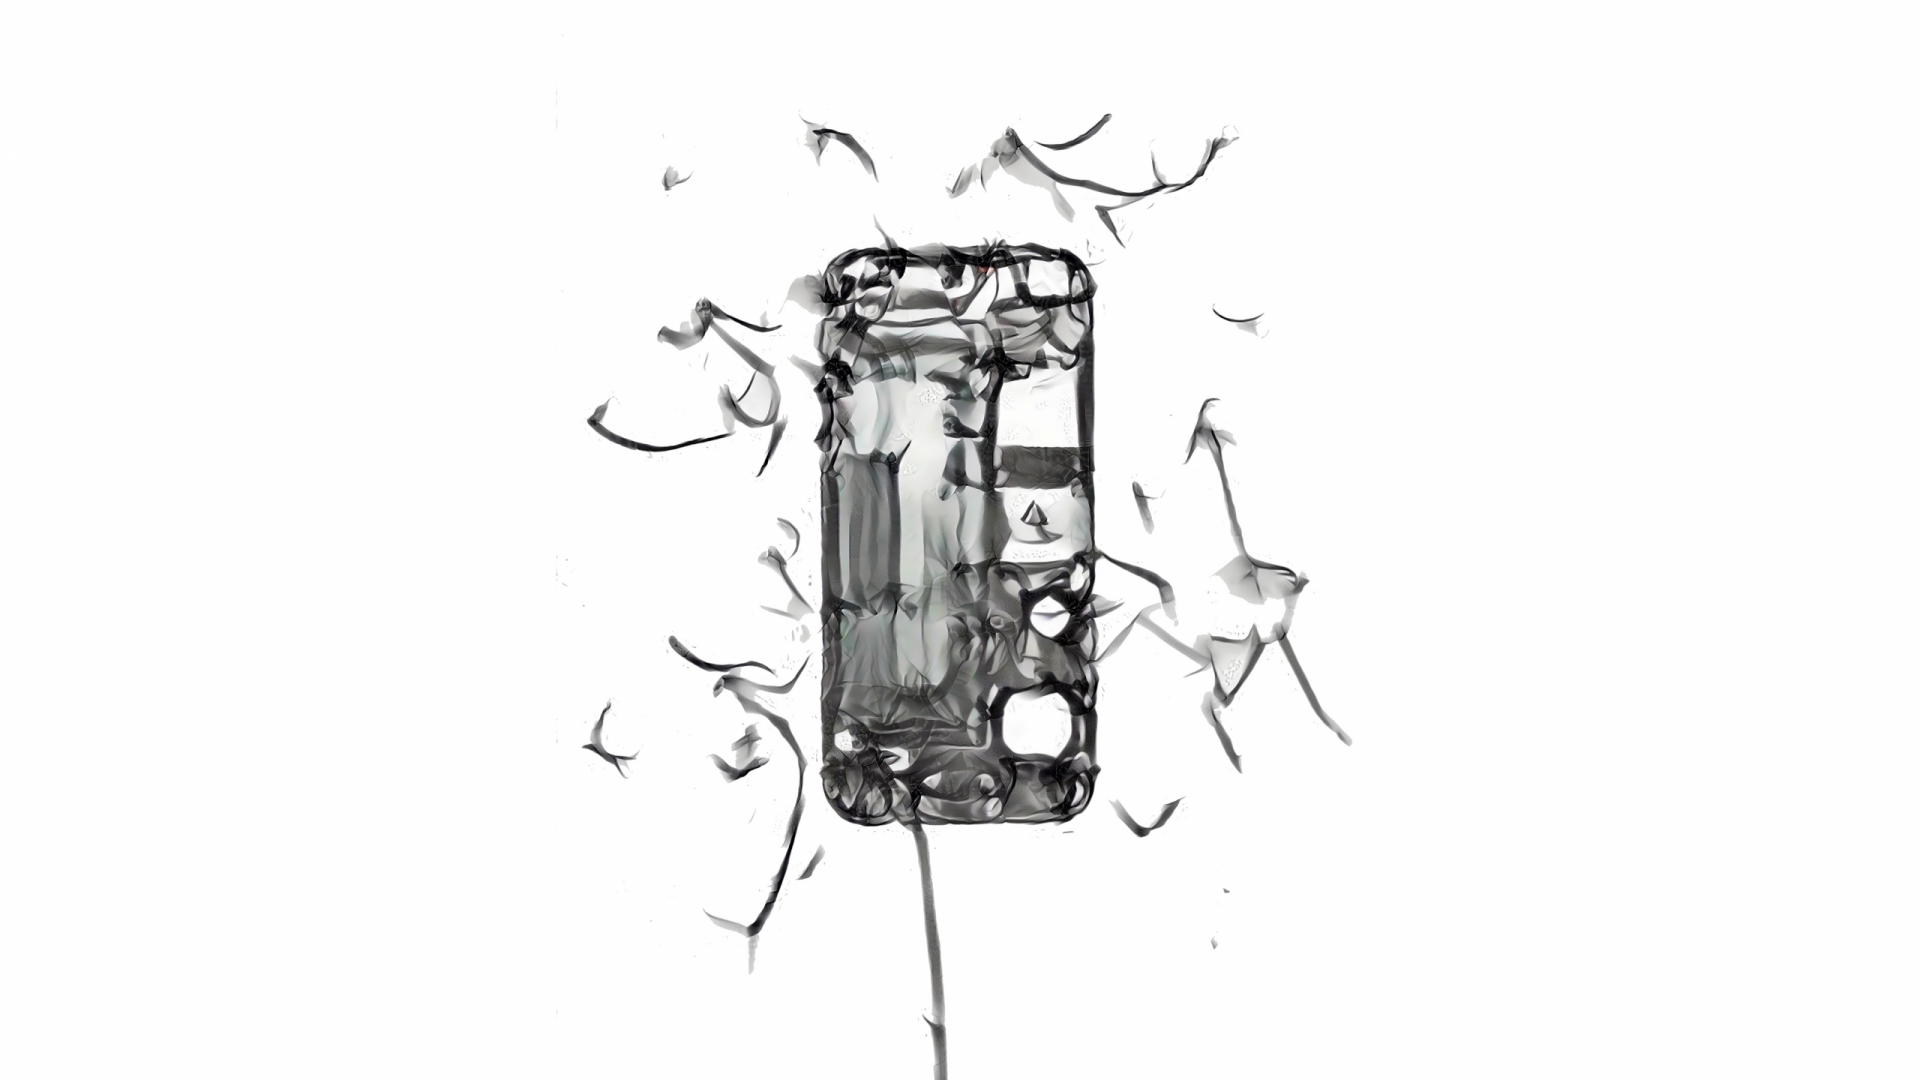 A greyscale digital image depicts a smartphone on a white ground on a painterly style. Dandelion frond appear to be floating out of the phone.